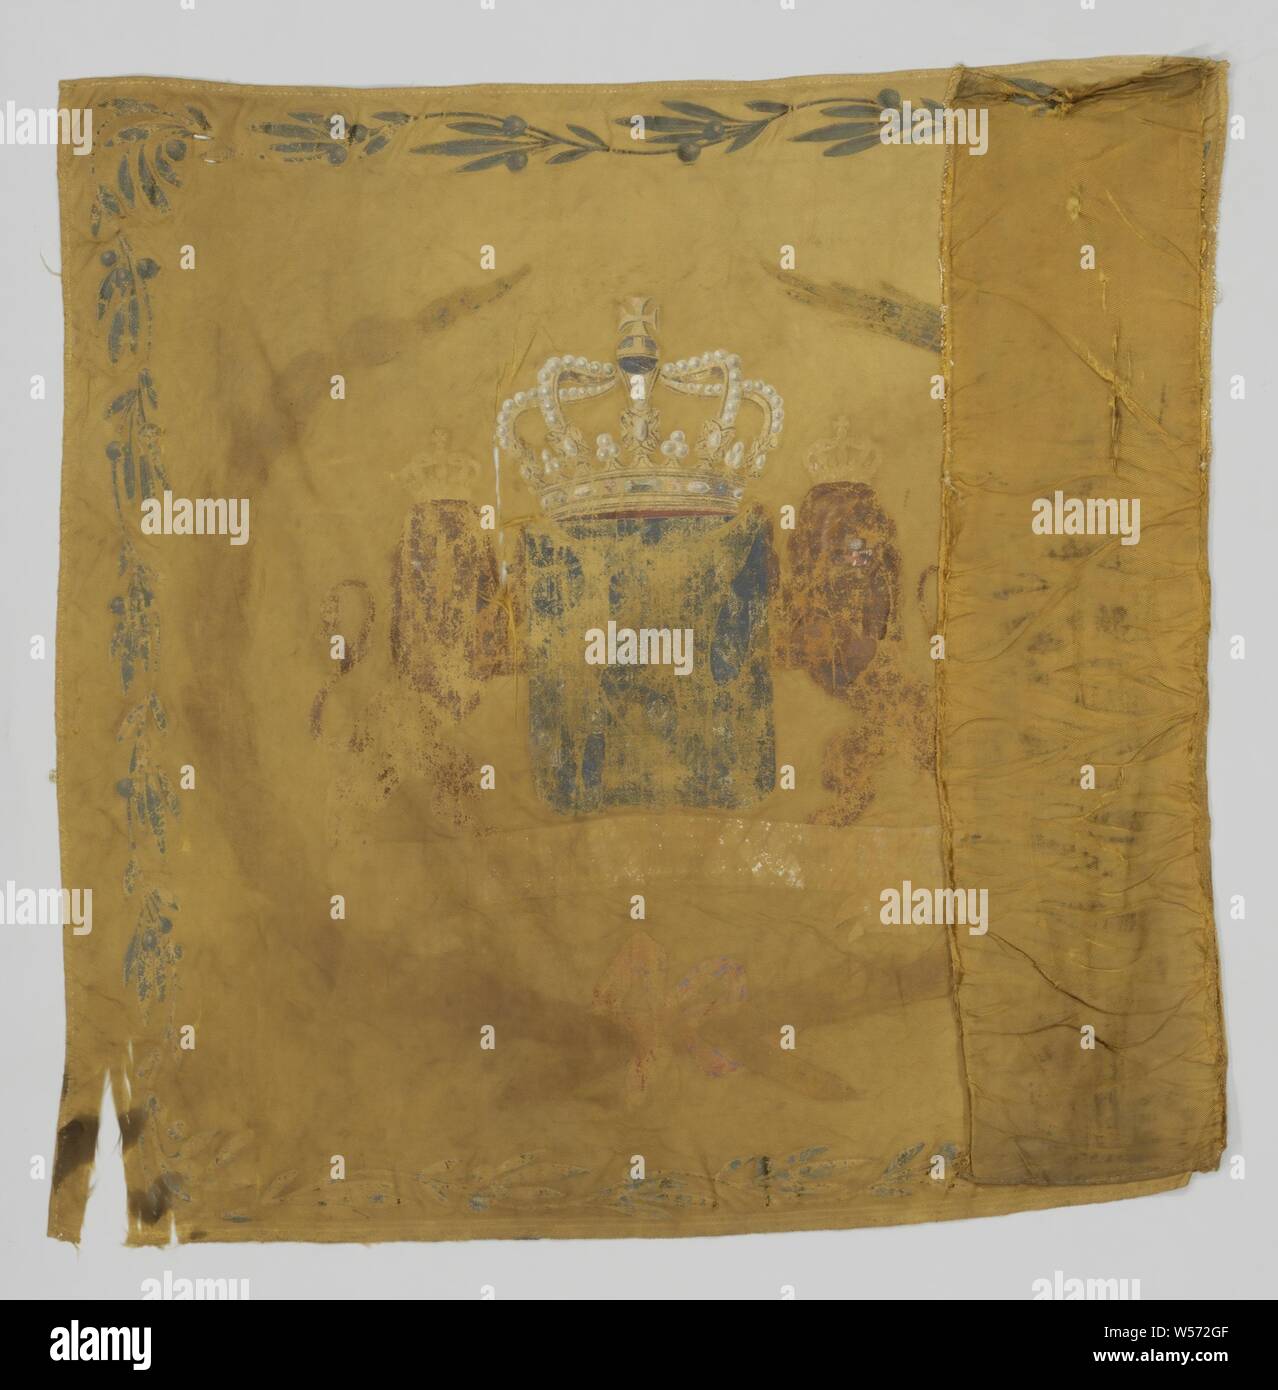 Fragment of yellow cream-colored banner with gold frills. on the front a crowned decorative W, including the inscription: DEPARTMENT OF KURASSIERS NO 1, Fragment of yellow cream-colored banner with gold frills. On the front a crowned decorative W, along the sides green branches with orange berries. On the parade side the crowned weapon of the kingdom, with banderole on which the weapon saying: JE MAINTIENDRAI, held by two crowned looking lions, this whole is surrounded by two raised laurel branches, which are held together at the bottom by a pink bow, along the silk green branches with orange Stock Photo